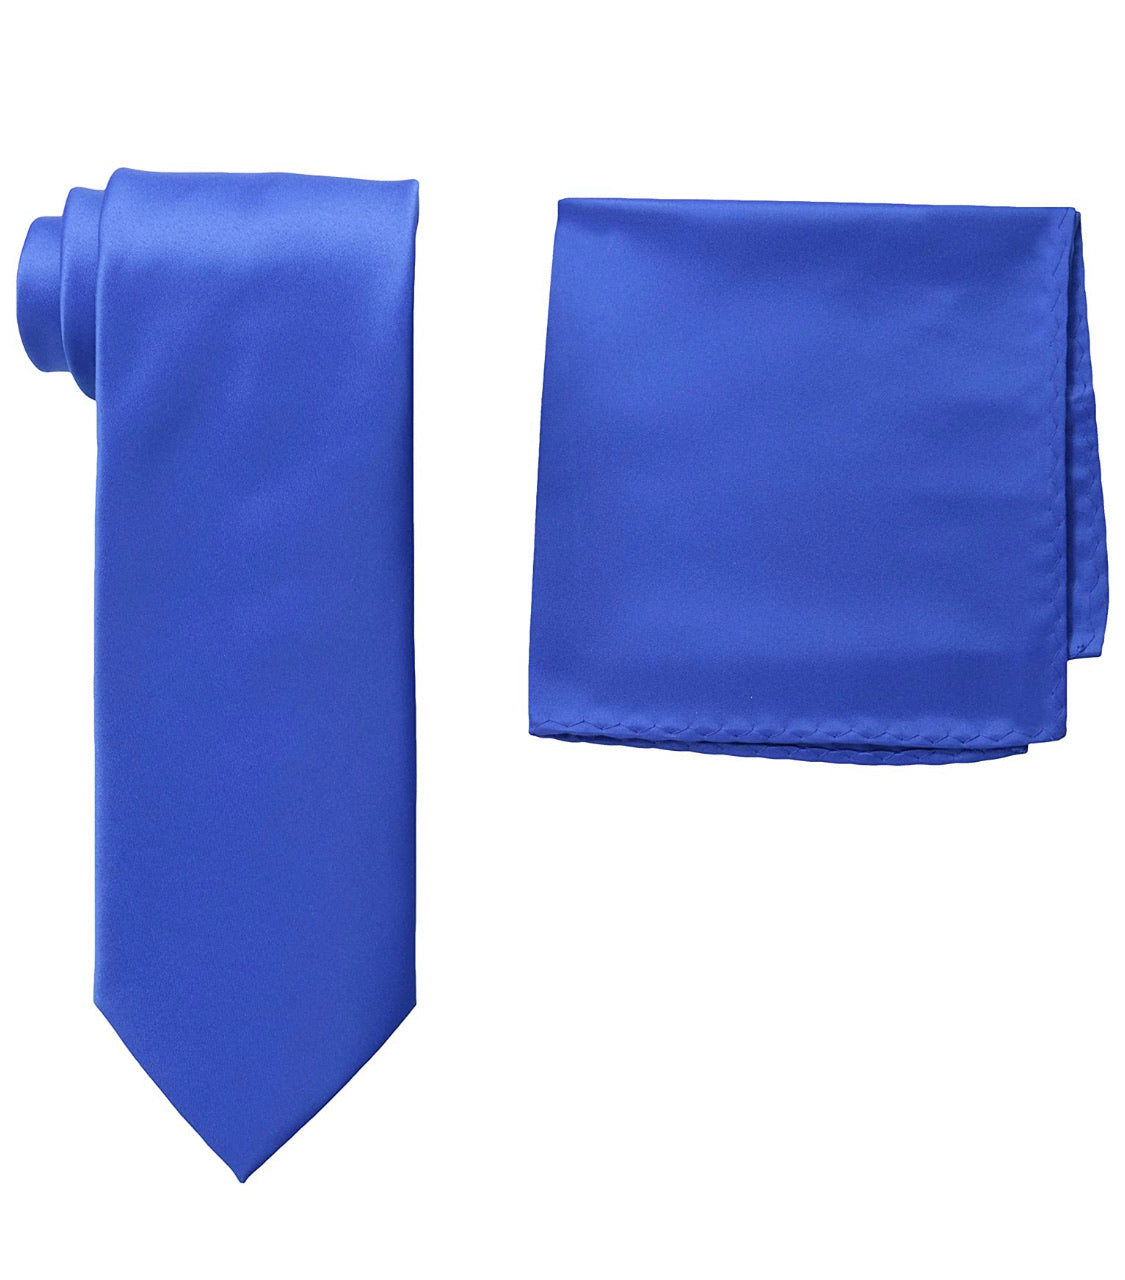 Stacy Adams Solid Royal Blue Tie and Hanky - On Time Fashions Tuscaloosa